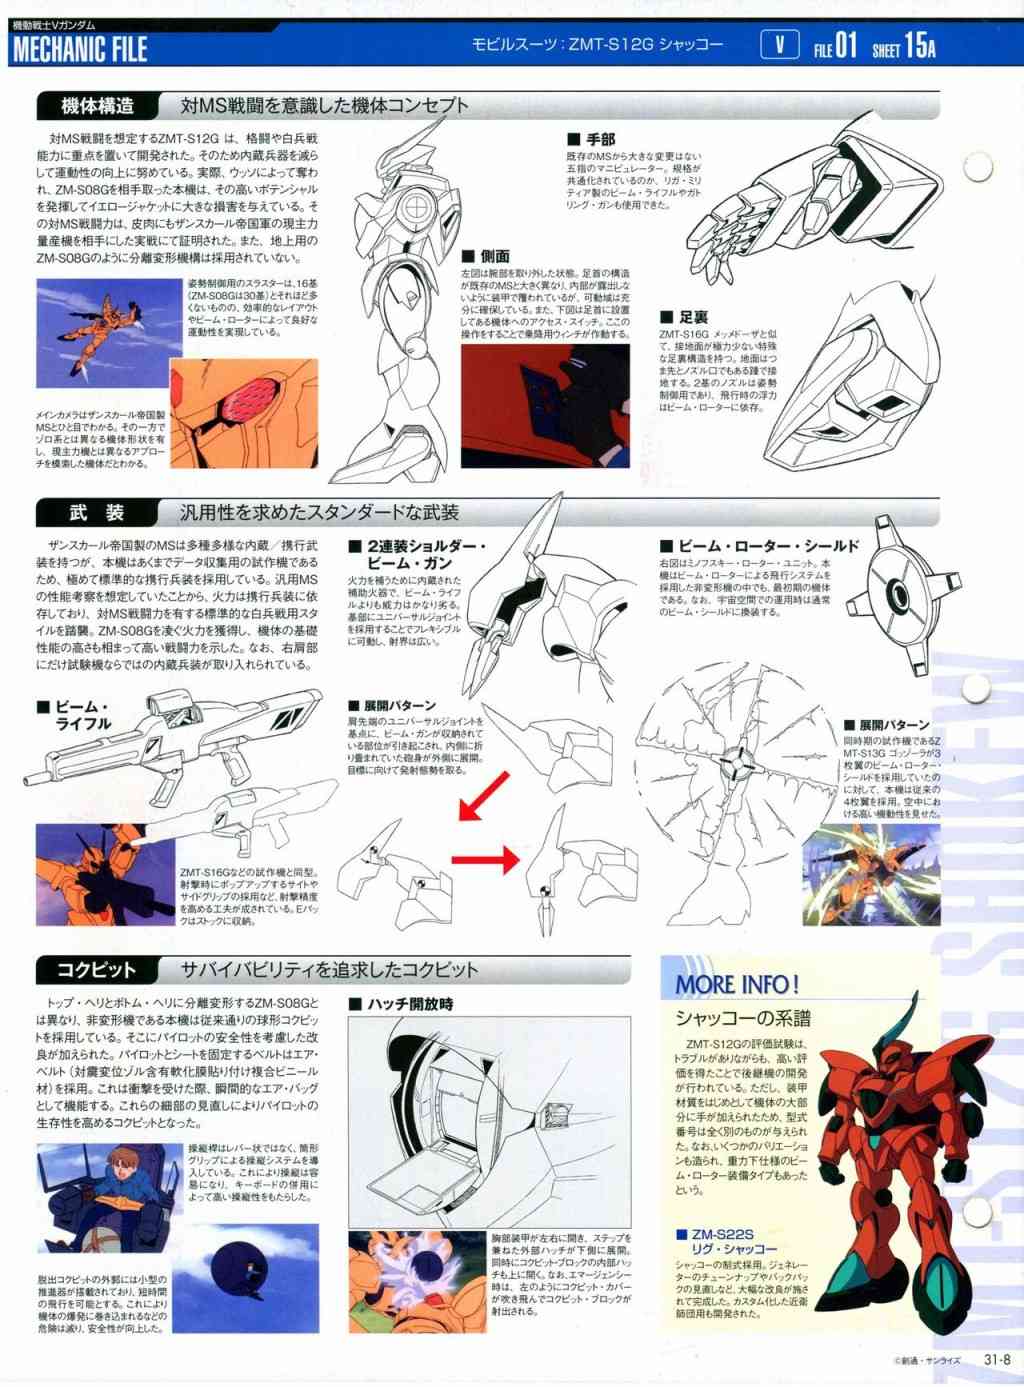 The Official Gundam Perfect File  - 第31-40話(1/8) - 5